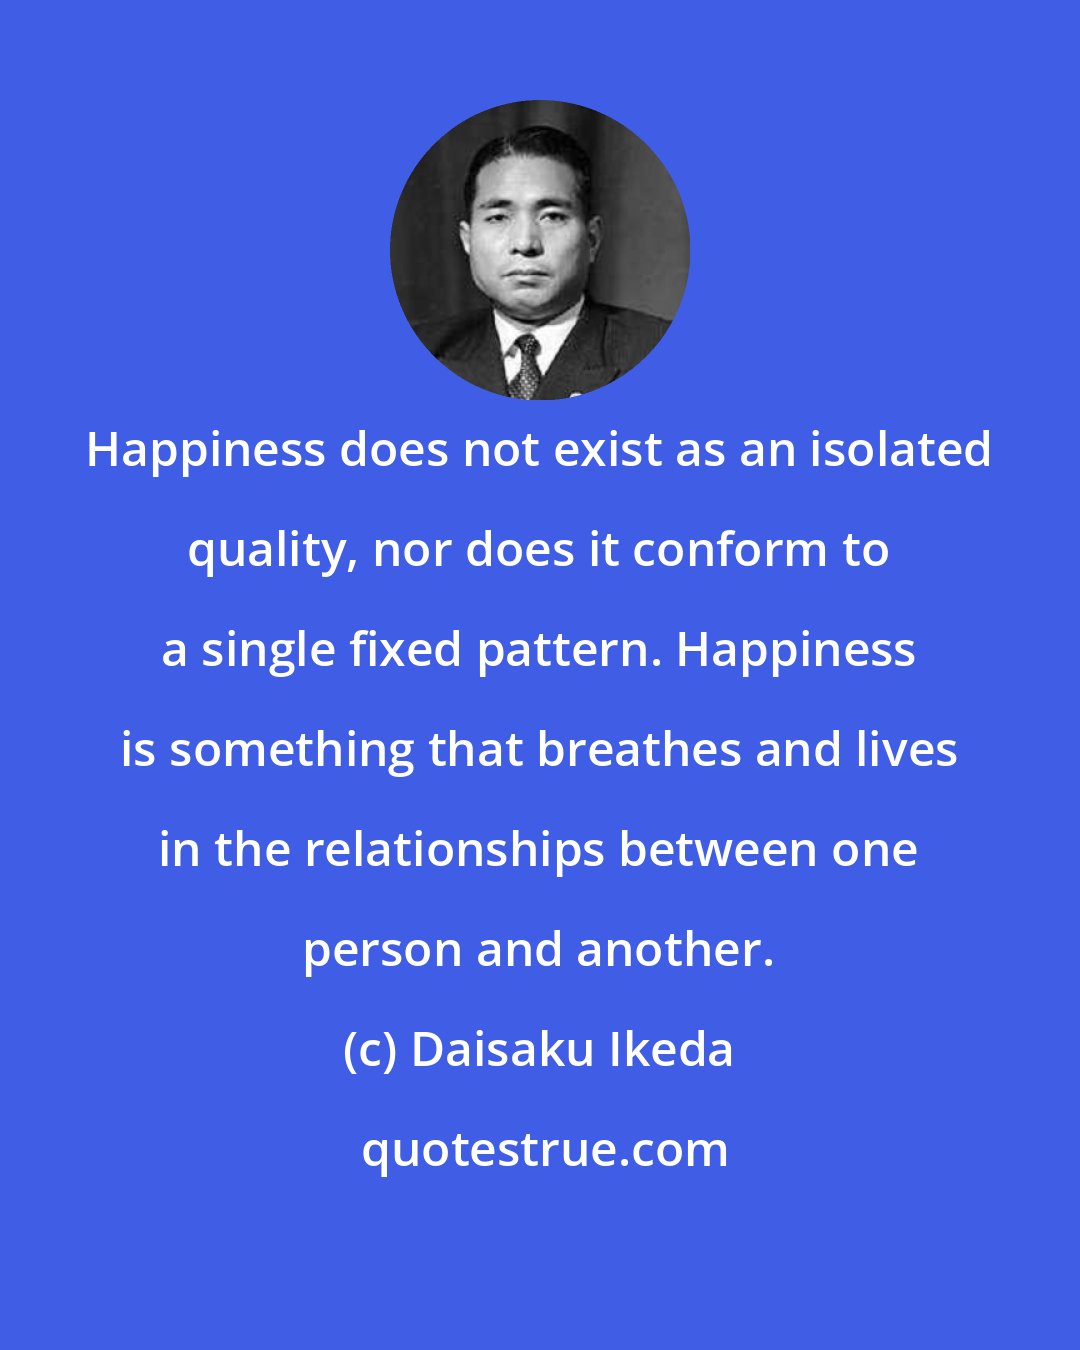 Daisaku Ikeda: Happiness does not exist as an isolated quality, nor does it conform to a single fixed pattern. Happiness is something that breathes and lives in the relationships between one person and another.